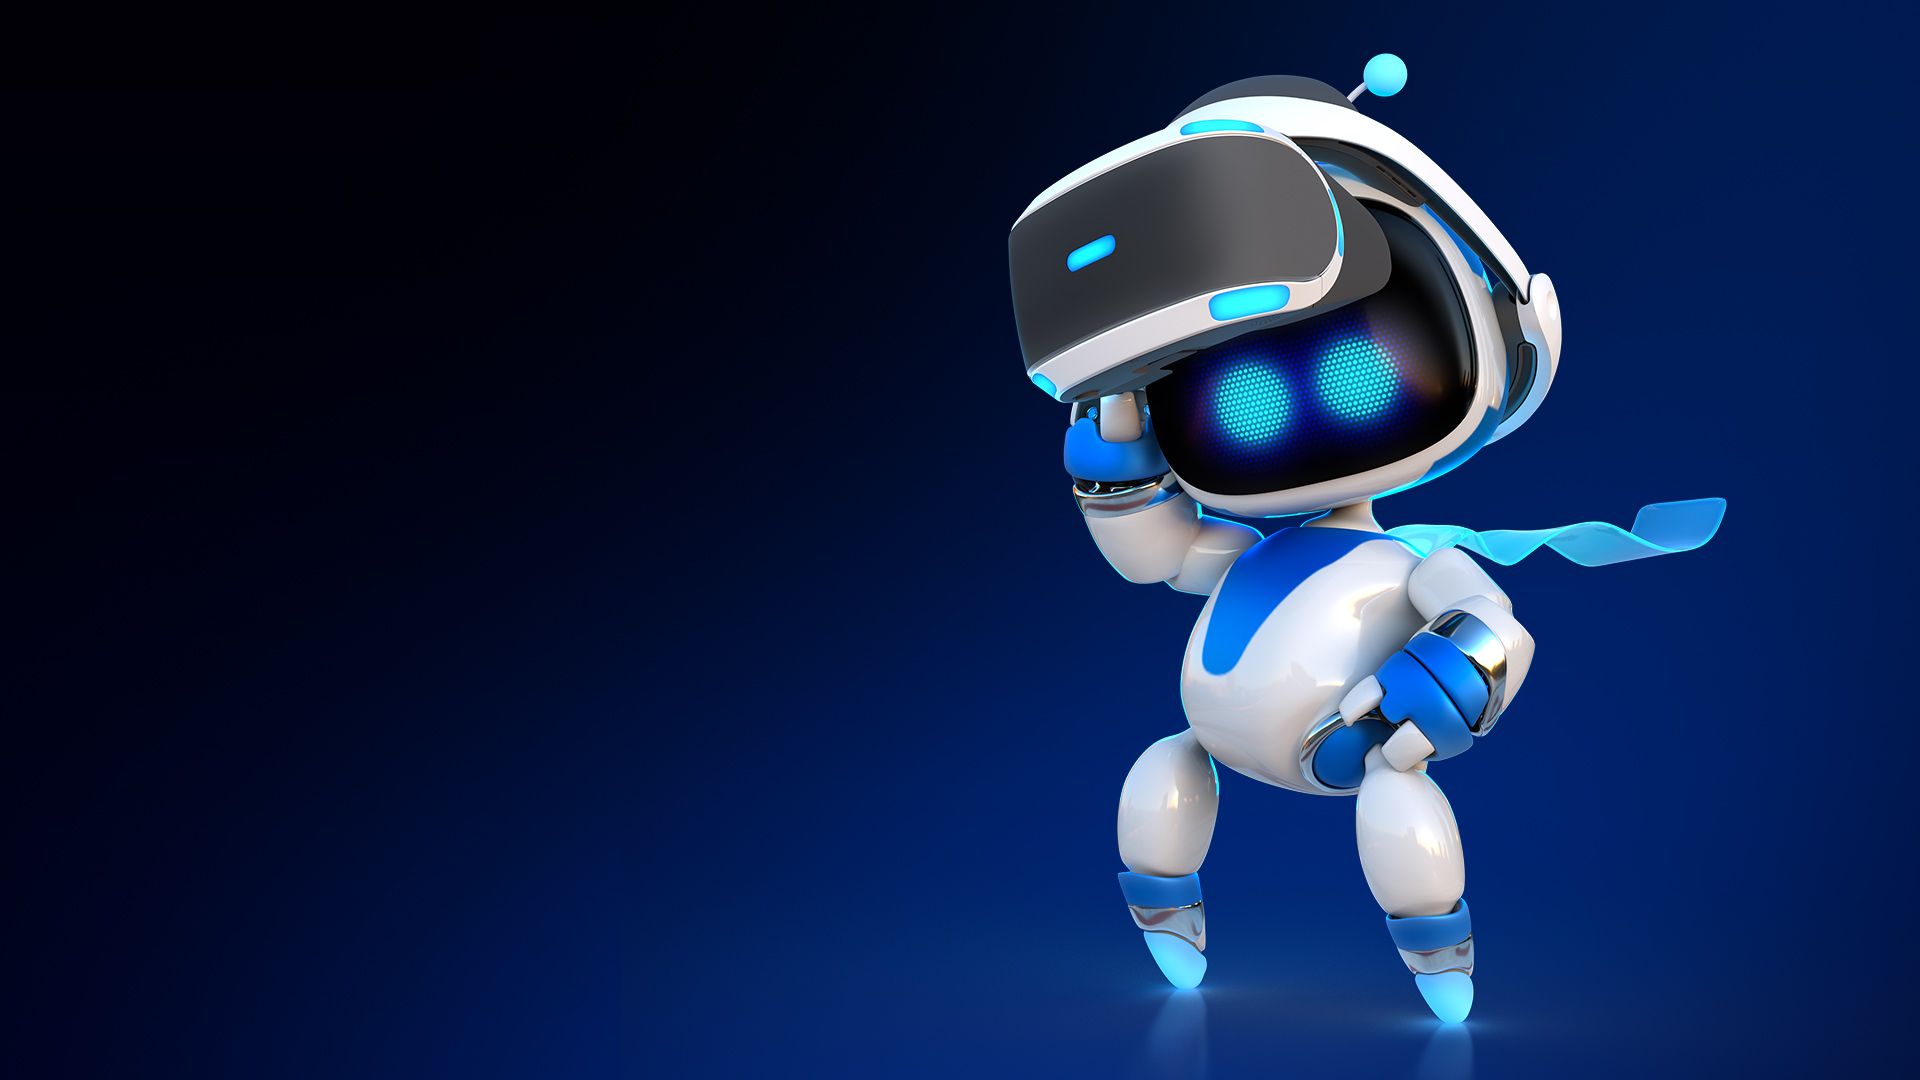 Astro Bot: Rescue Mission (2018) promotional art